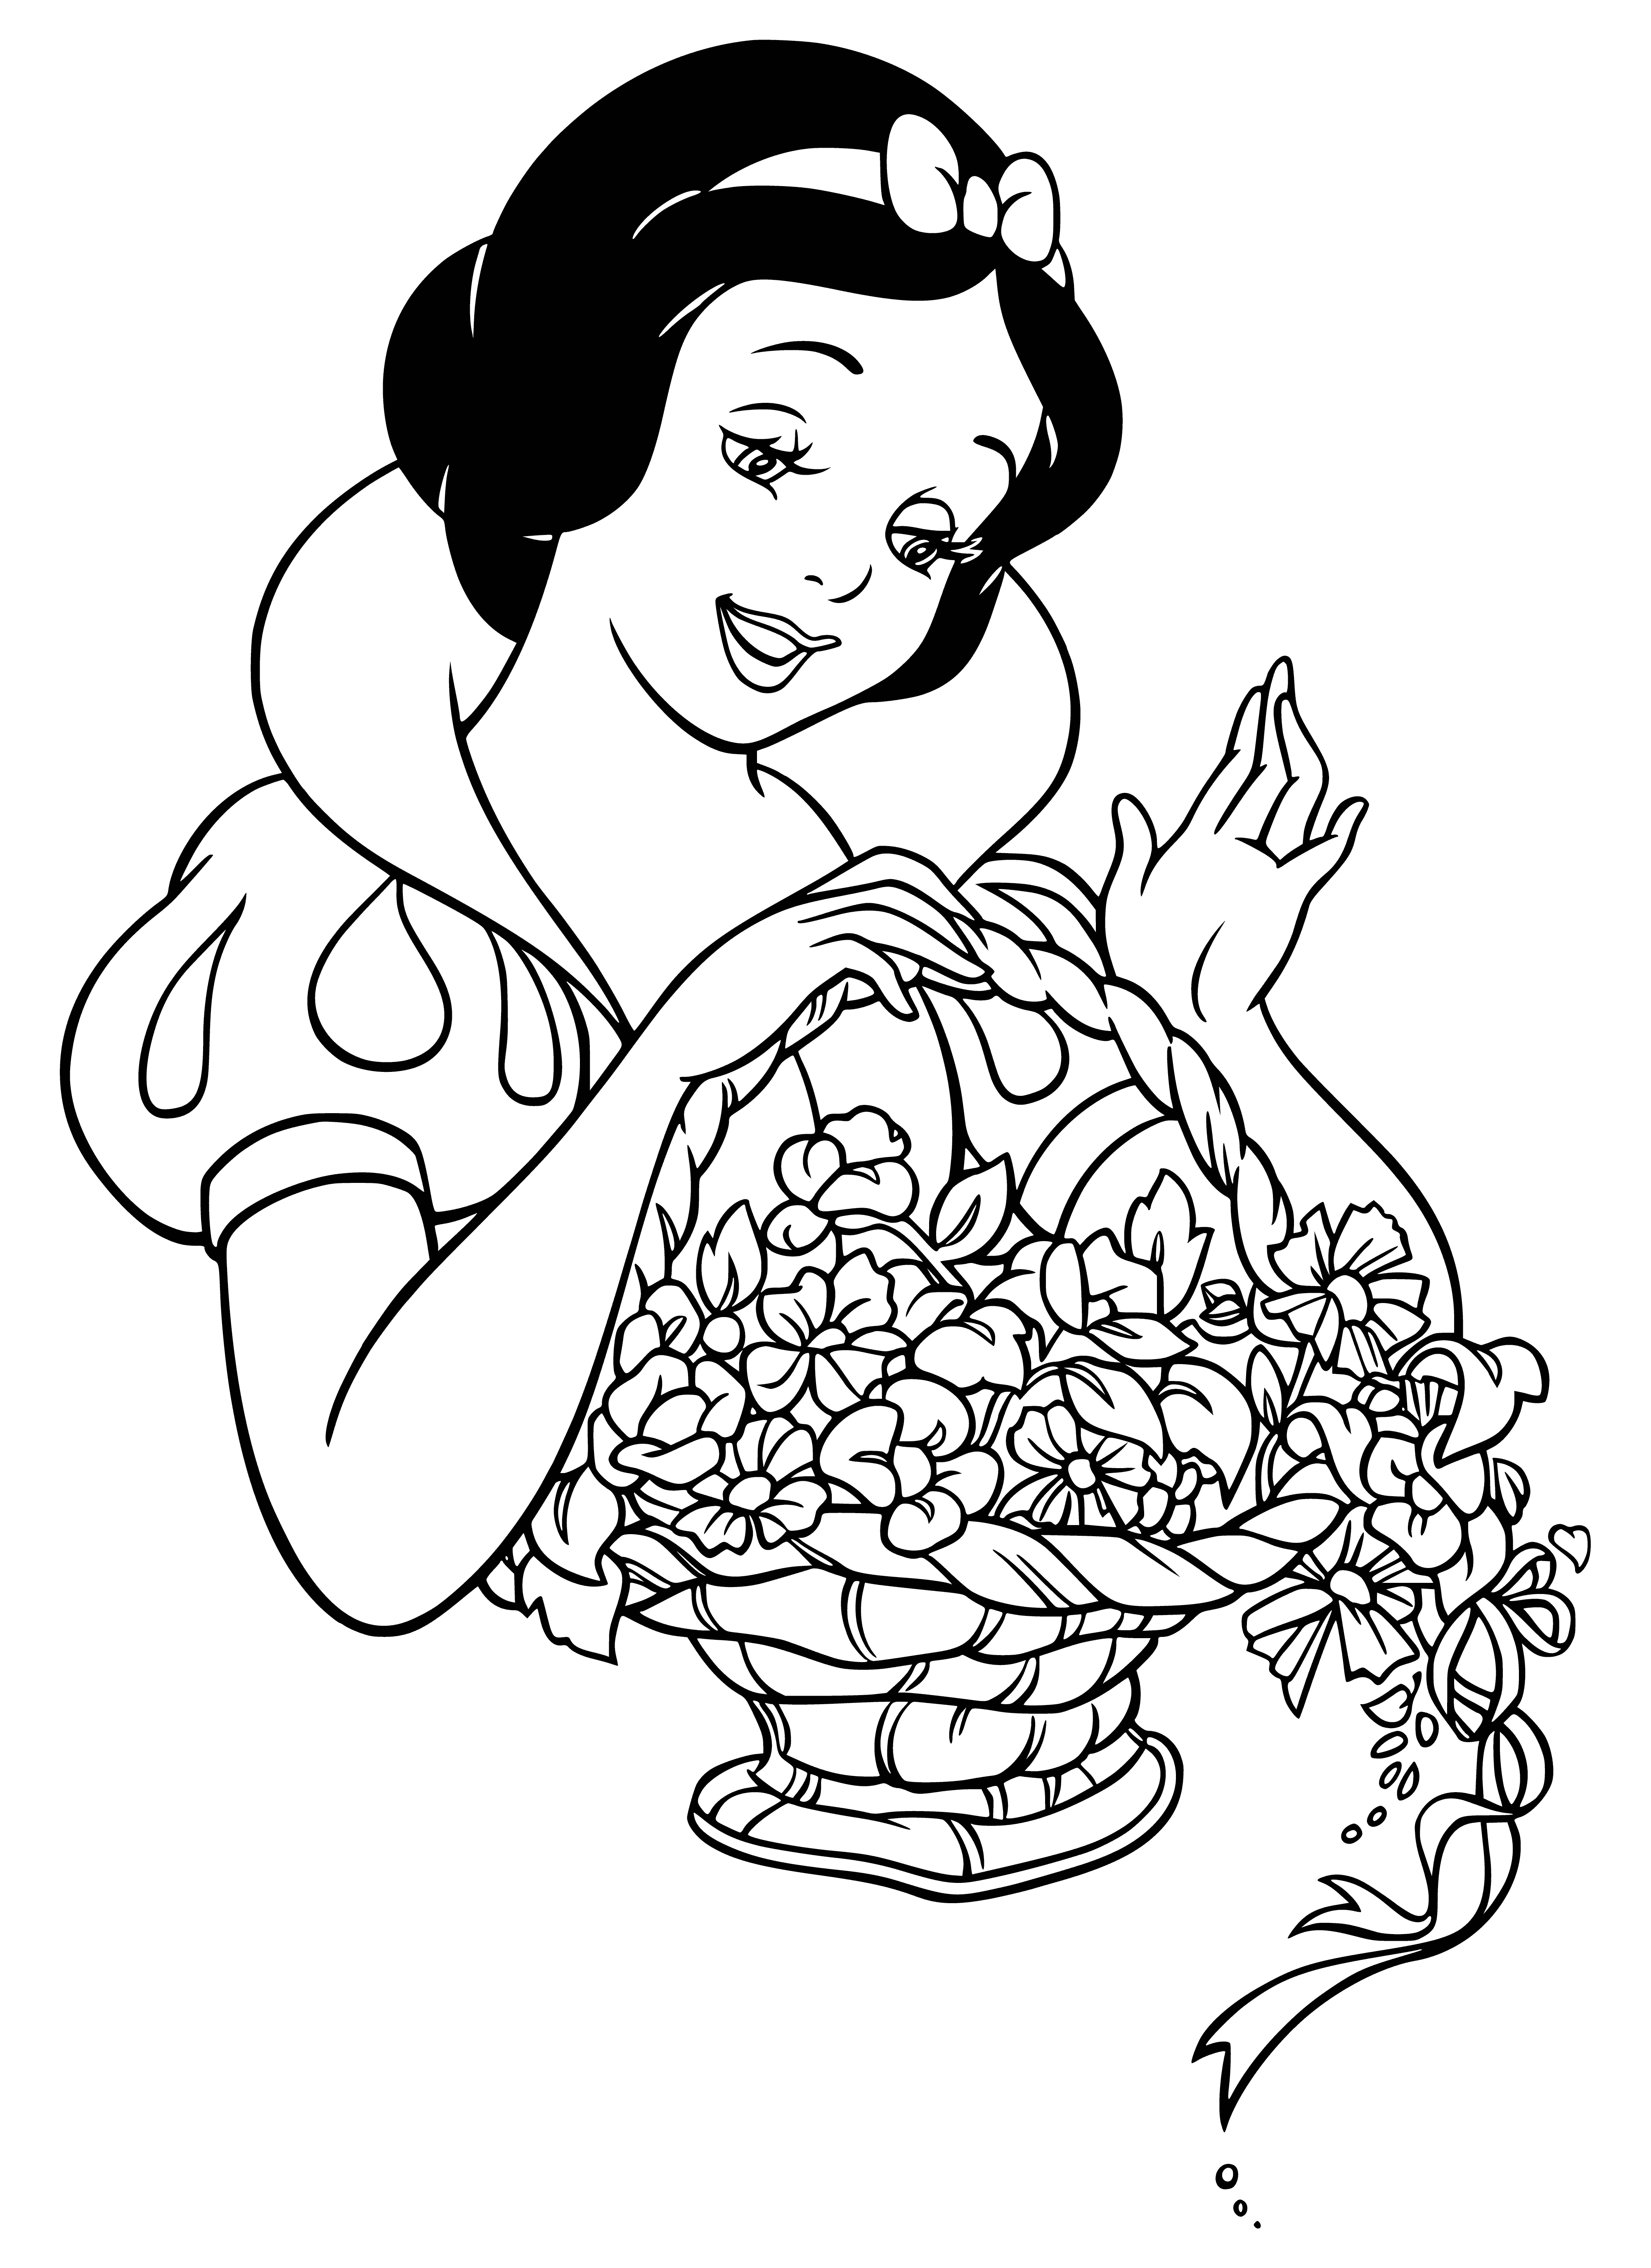 coloring page: Snow White walks through the woods carrying a basket of flowers, trailed by seven dwarfs. She wears a blue dress with a white apron, and has black hair adorned by a red ribbon.